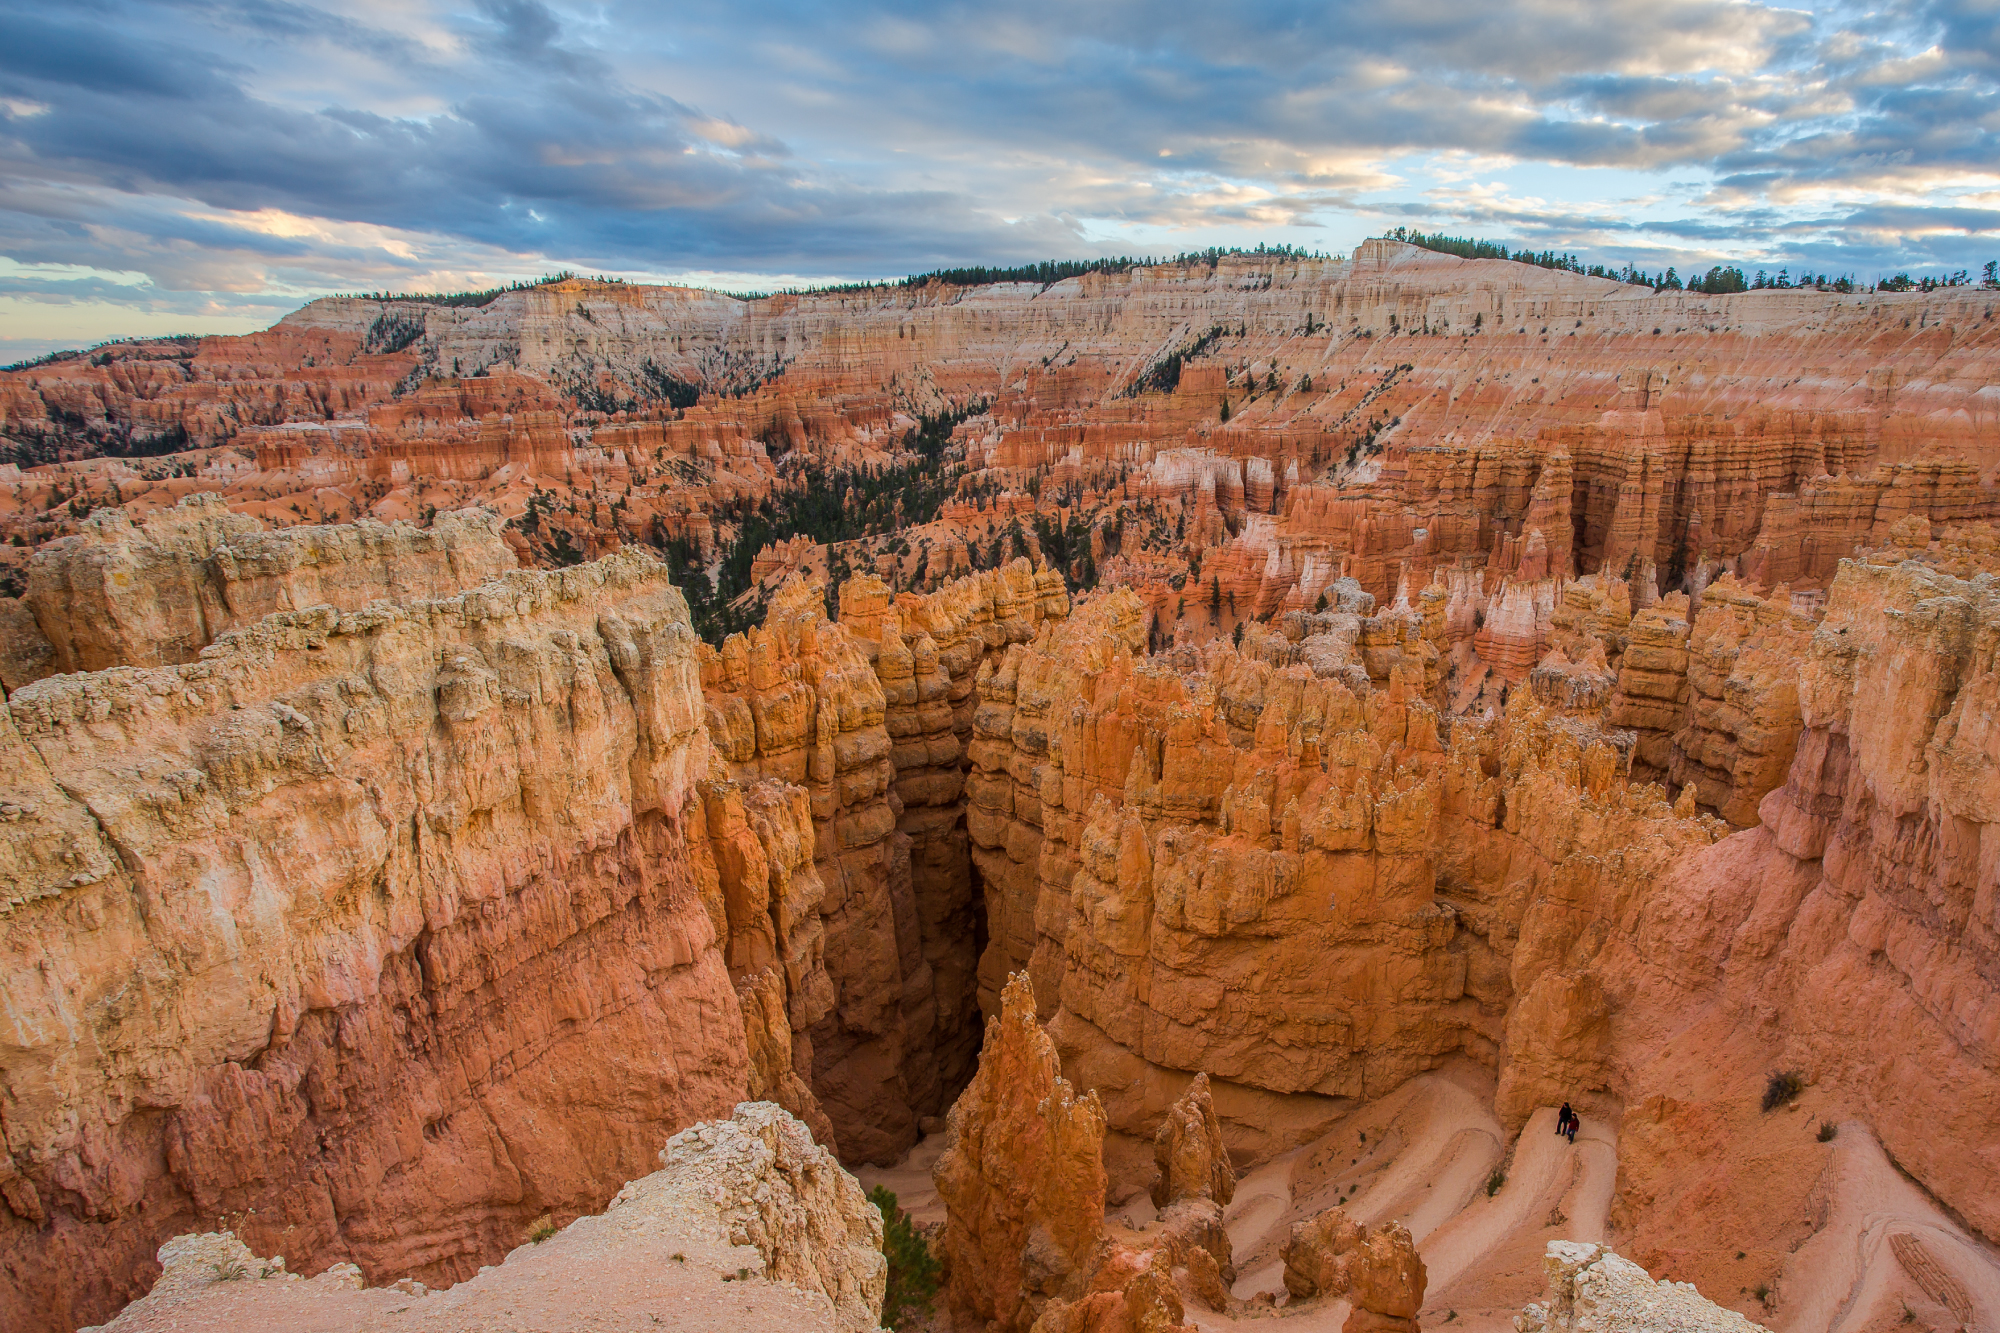 HDR Photography Workshop: Bryce Canyon HDR | Pt.3 | HDR Processing